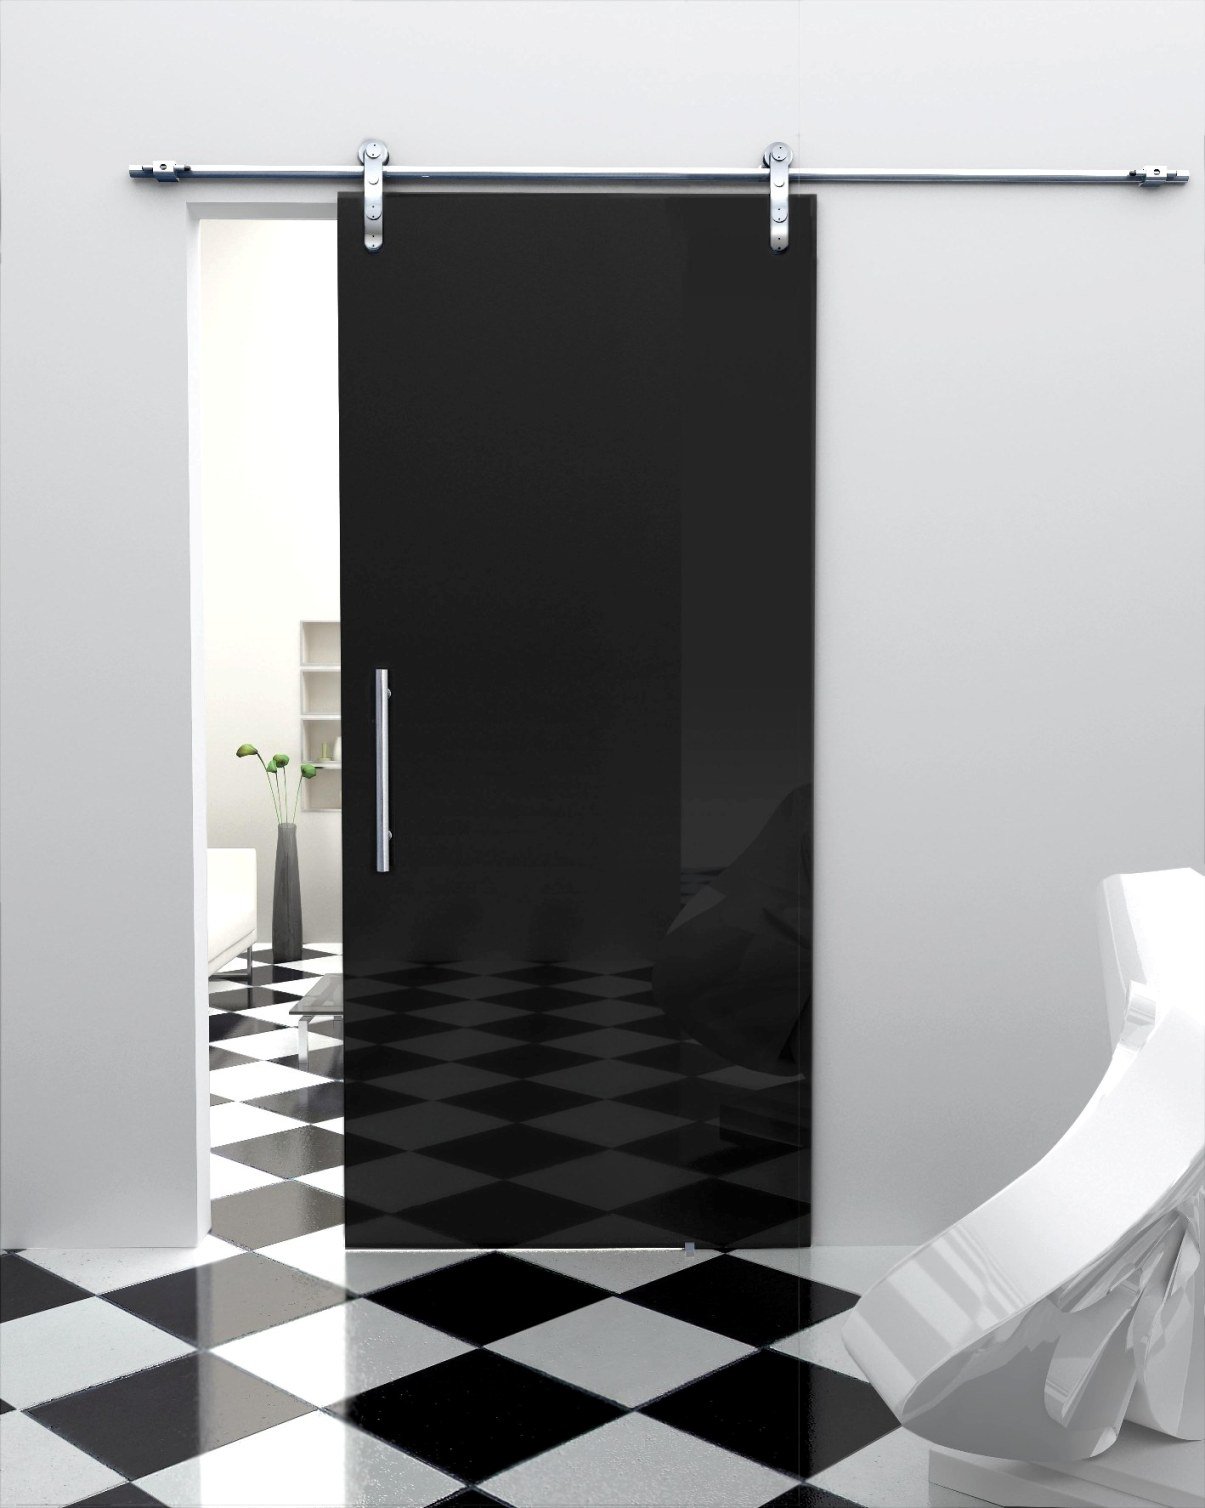 Checkerboard Floor Paired Clean Checkerboard Floor Tile Background Paired With Plain White Wall Paint Color Also Black Glass Sliding Interior Door Design House Designs  Black Interior Doors Perform Cool Doors 